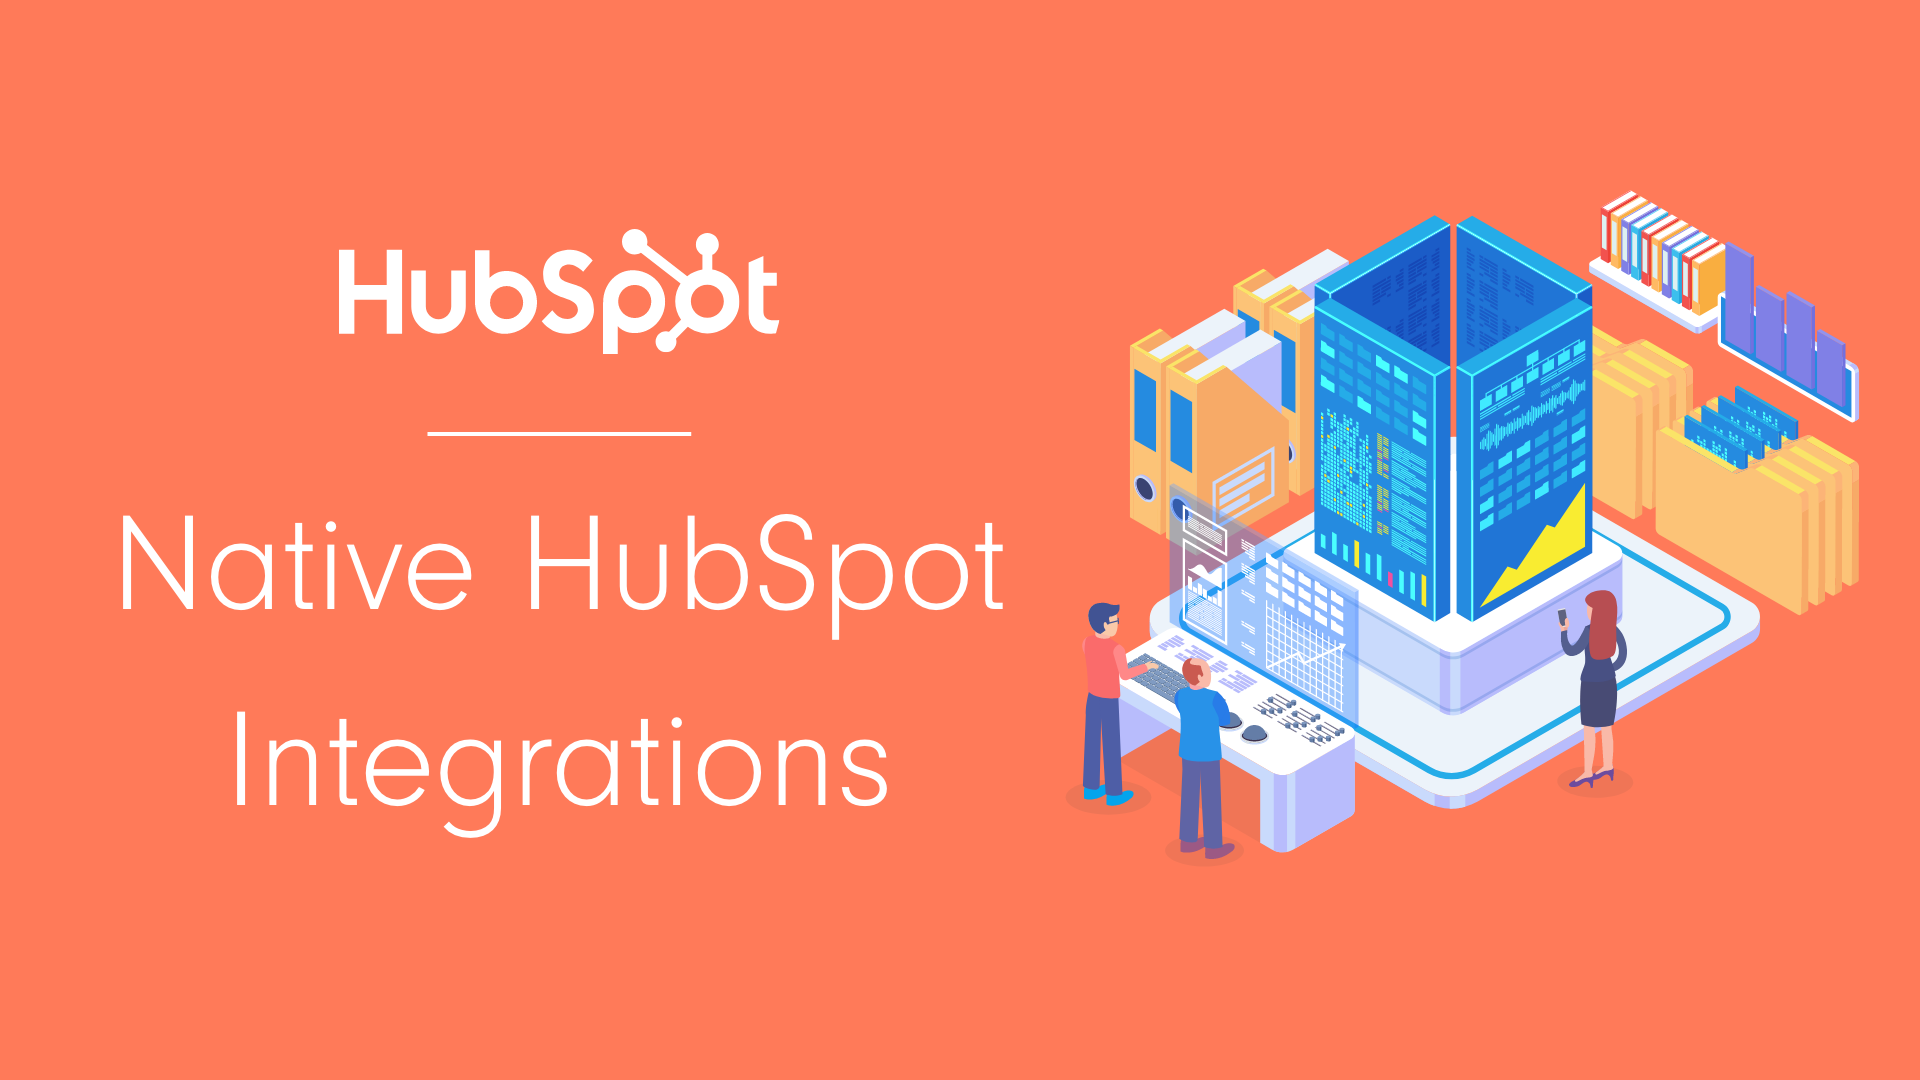  The image shows a diagram representing the strategic acquisition of HubSpot by Alphabet, with two people standing in front of a large computer labeled 'Native HubSpot Integrations'.